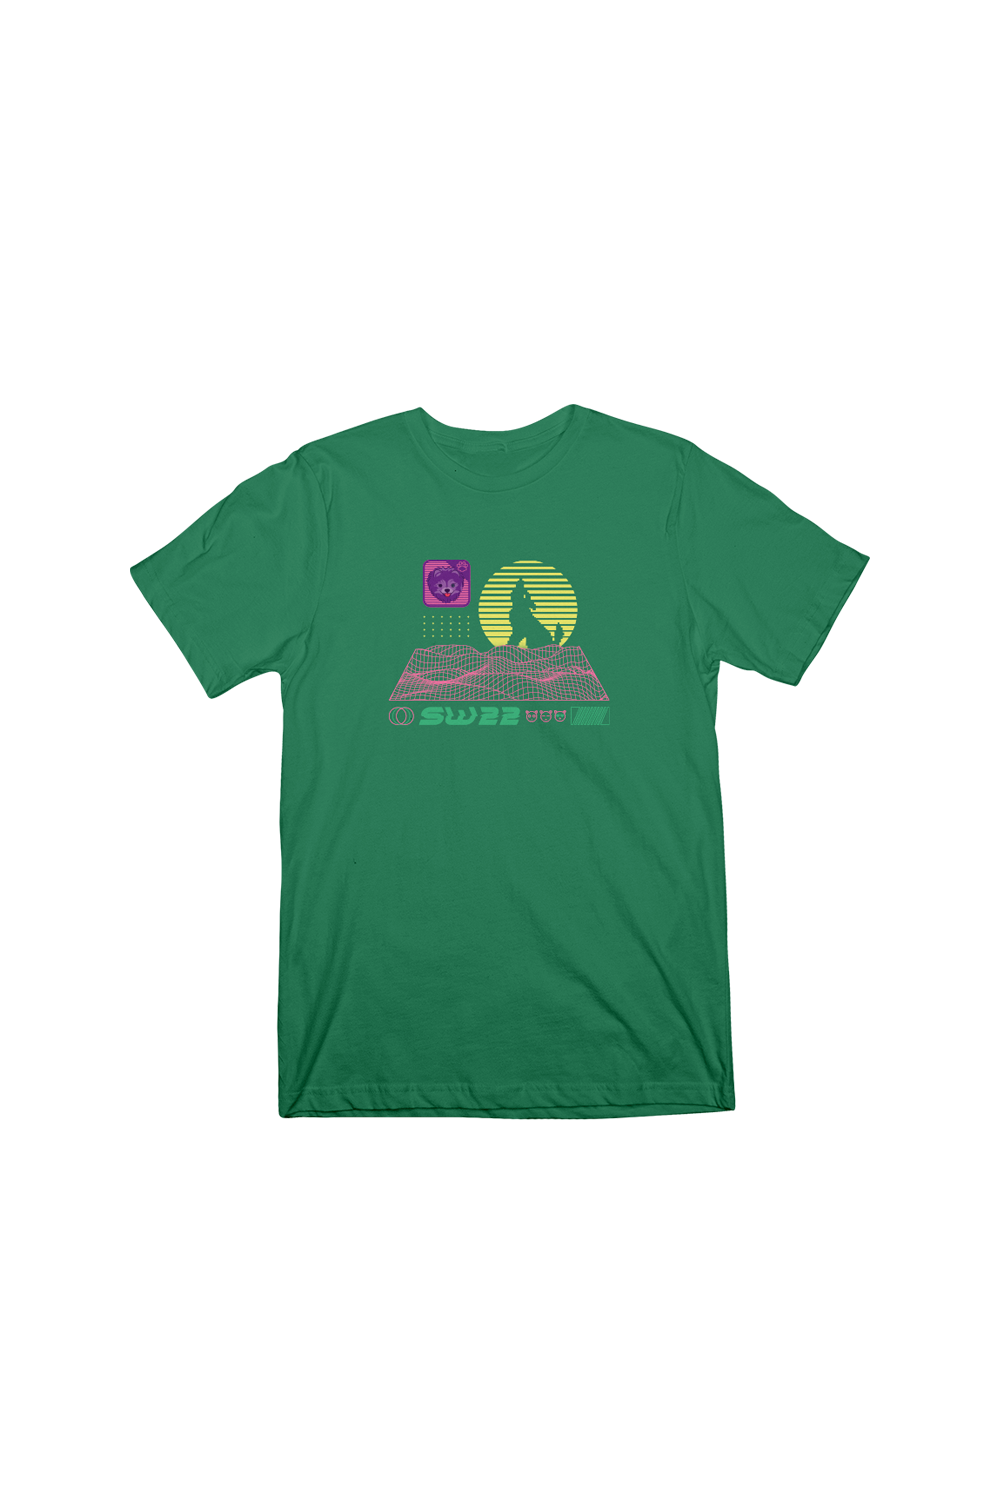 Synthwave Youth Green Shirt